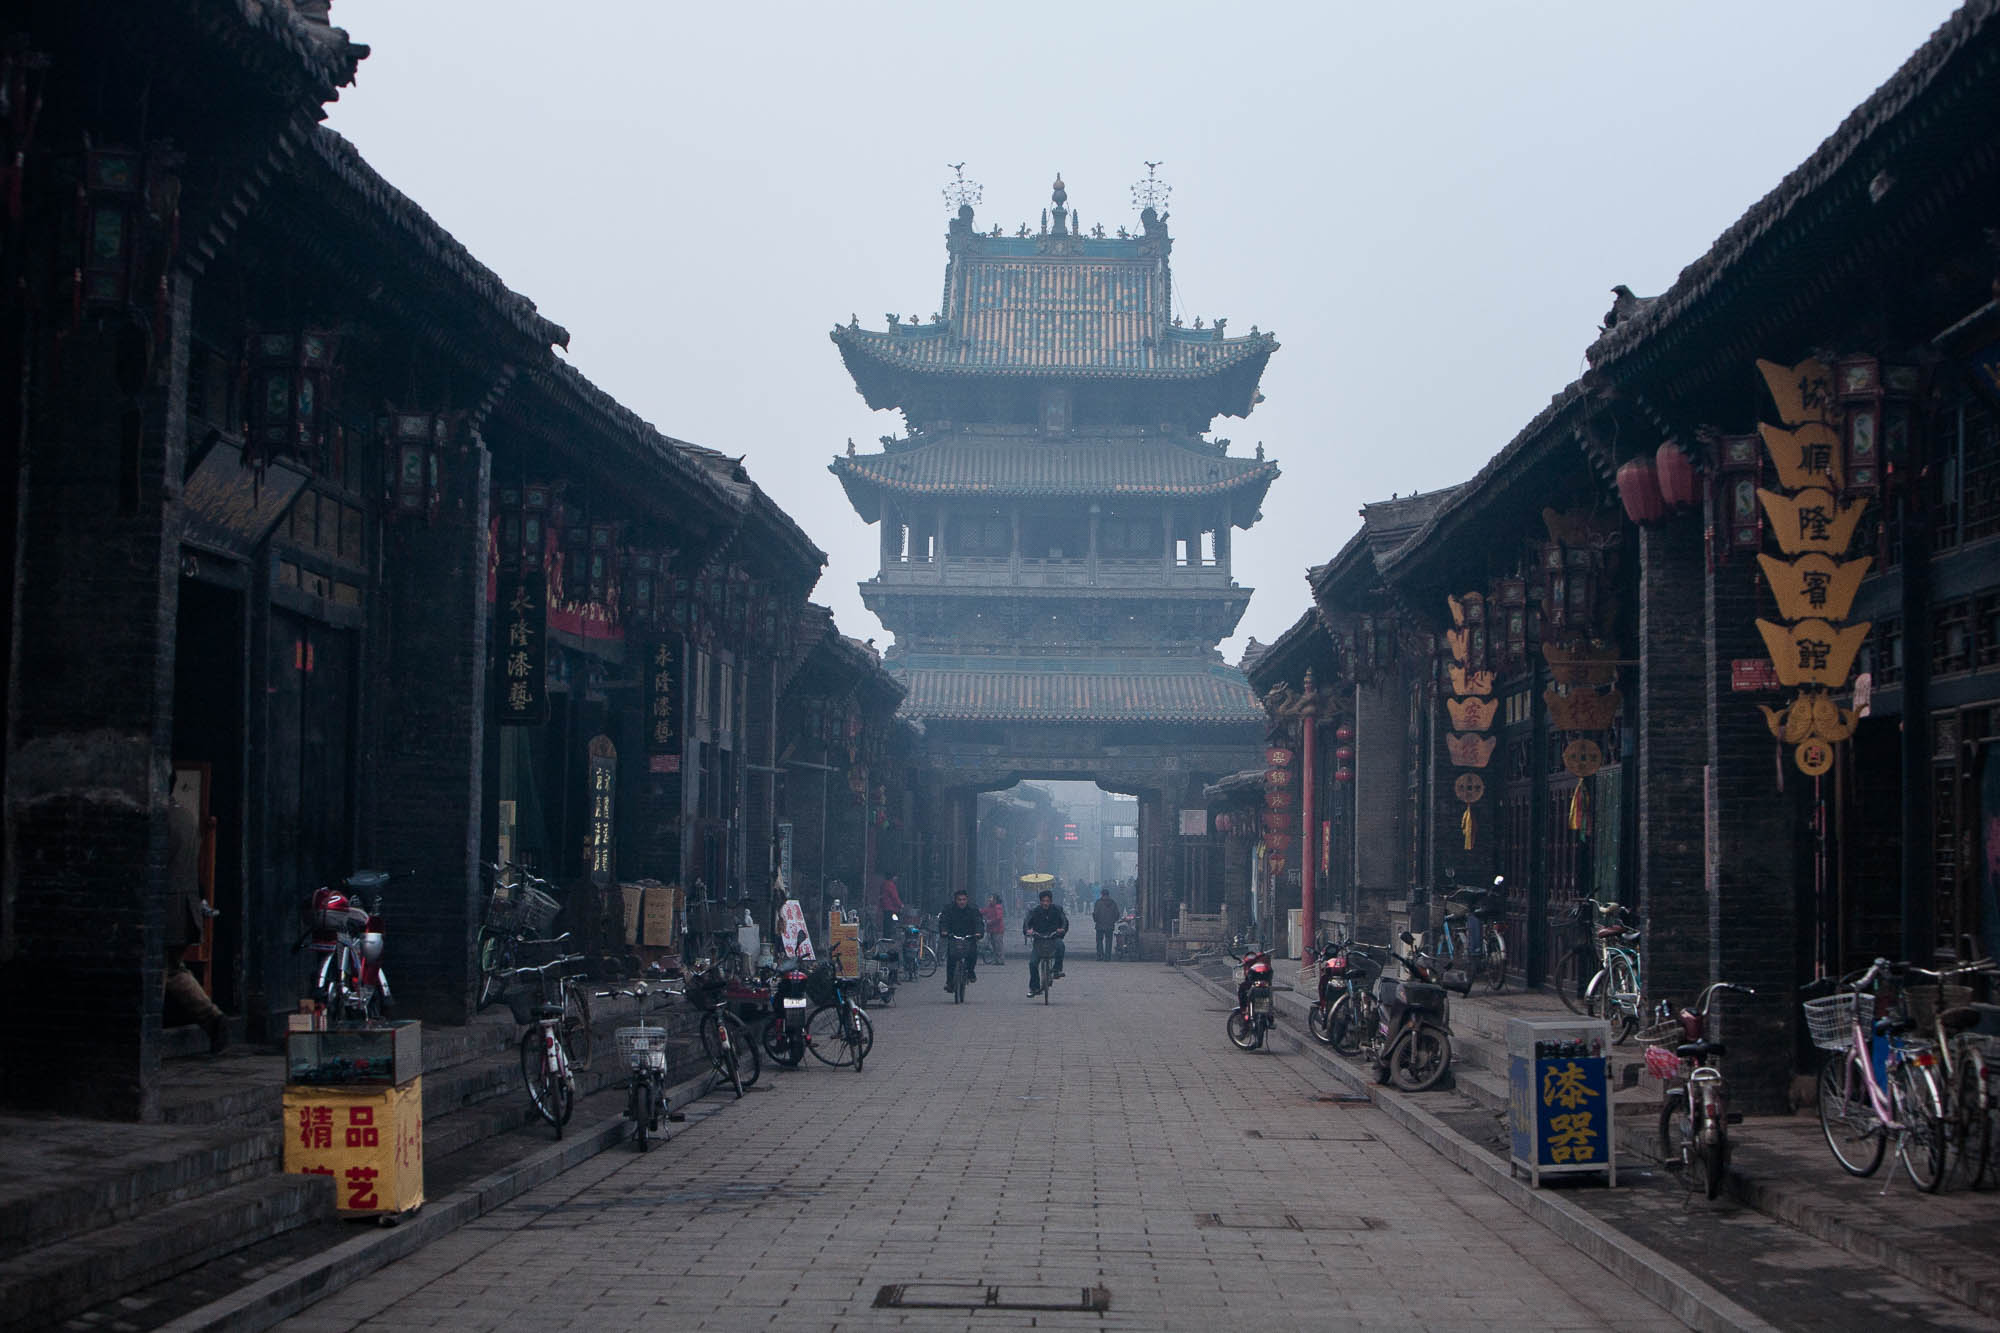 Pingyao Old Town